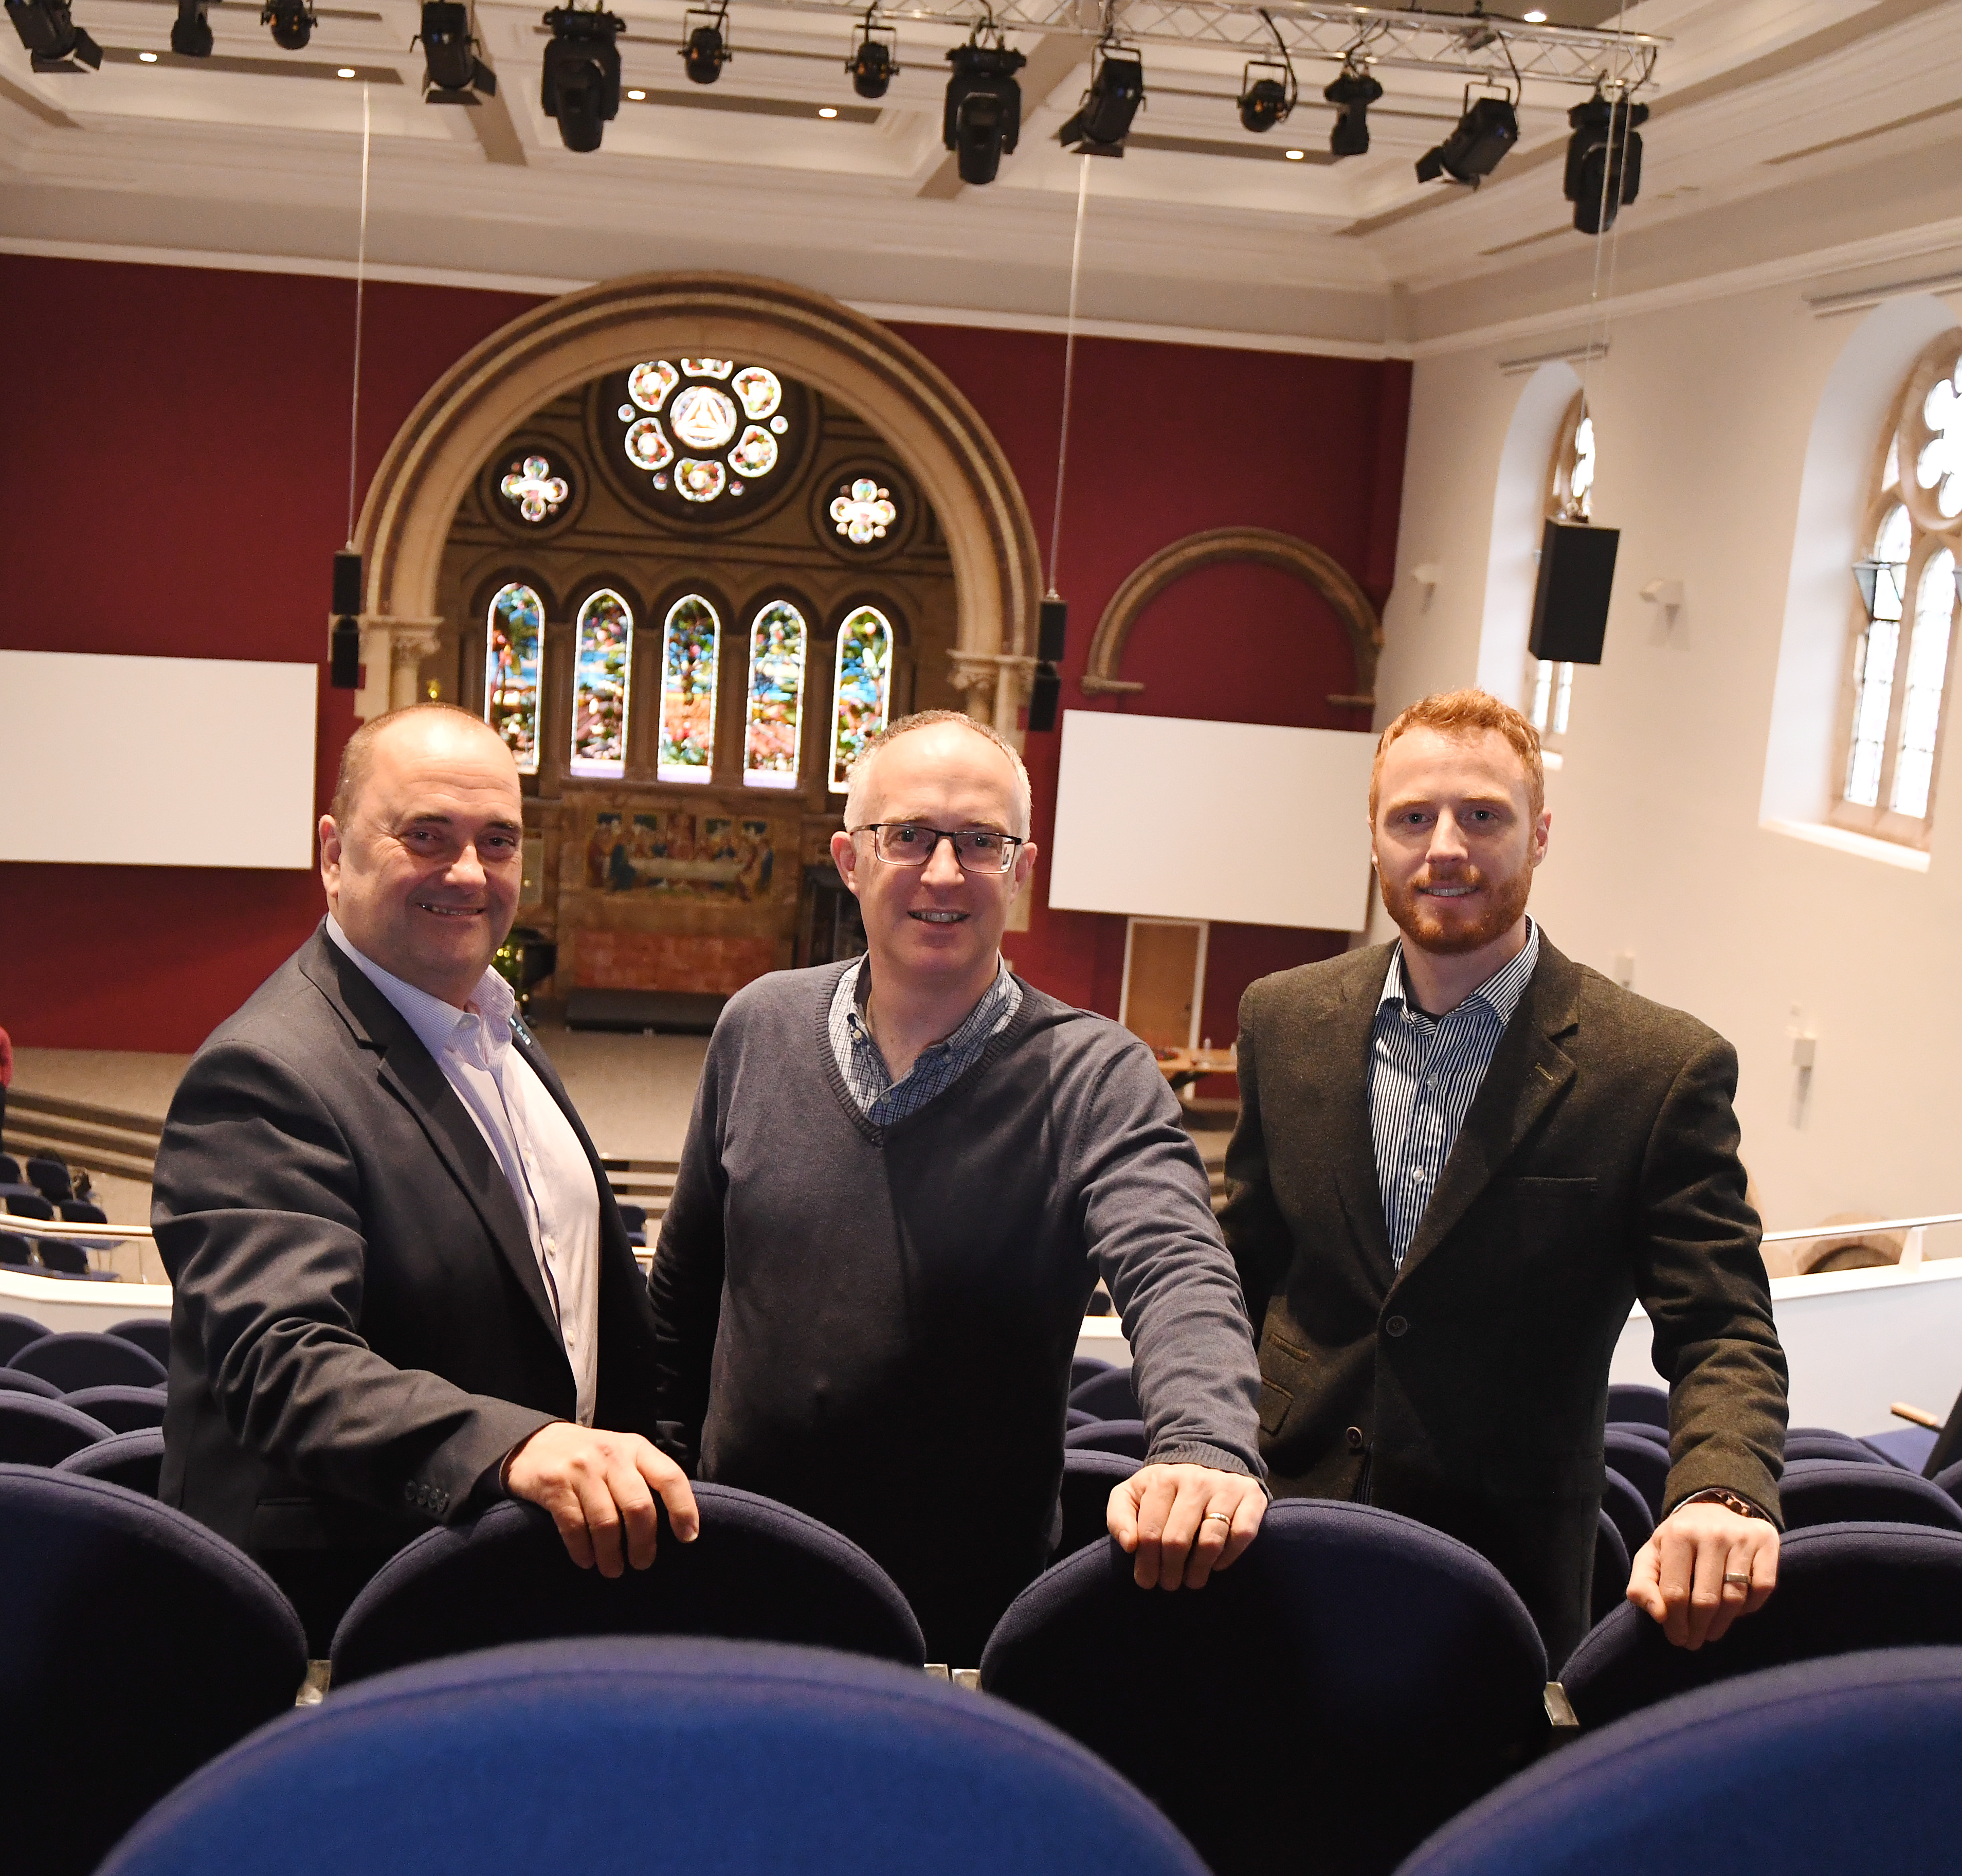 Breathing new life into a historic Midlands church